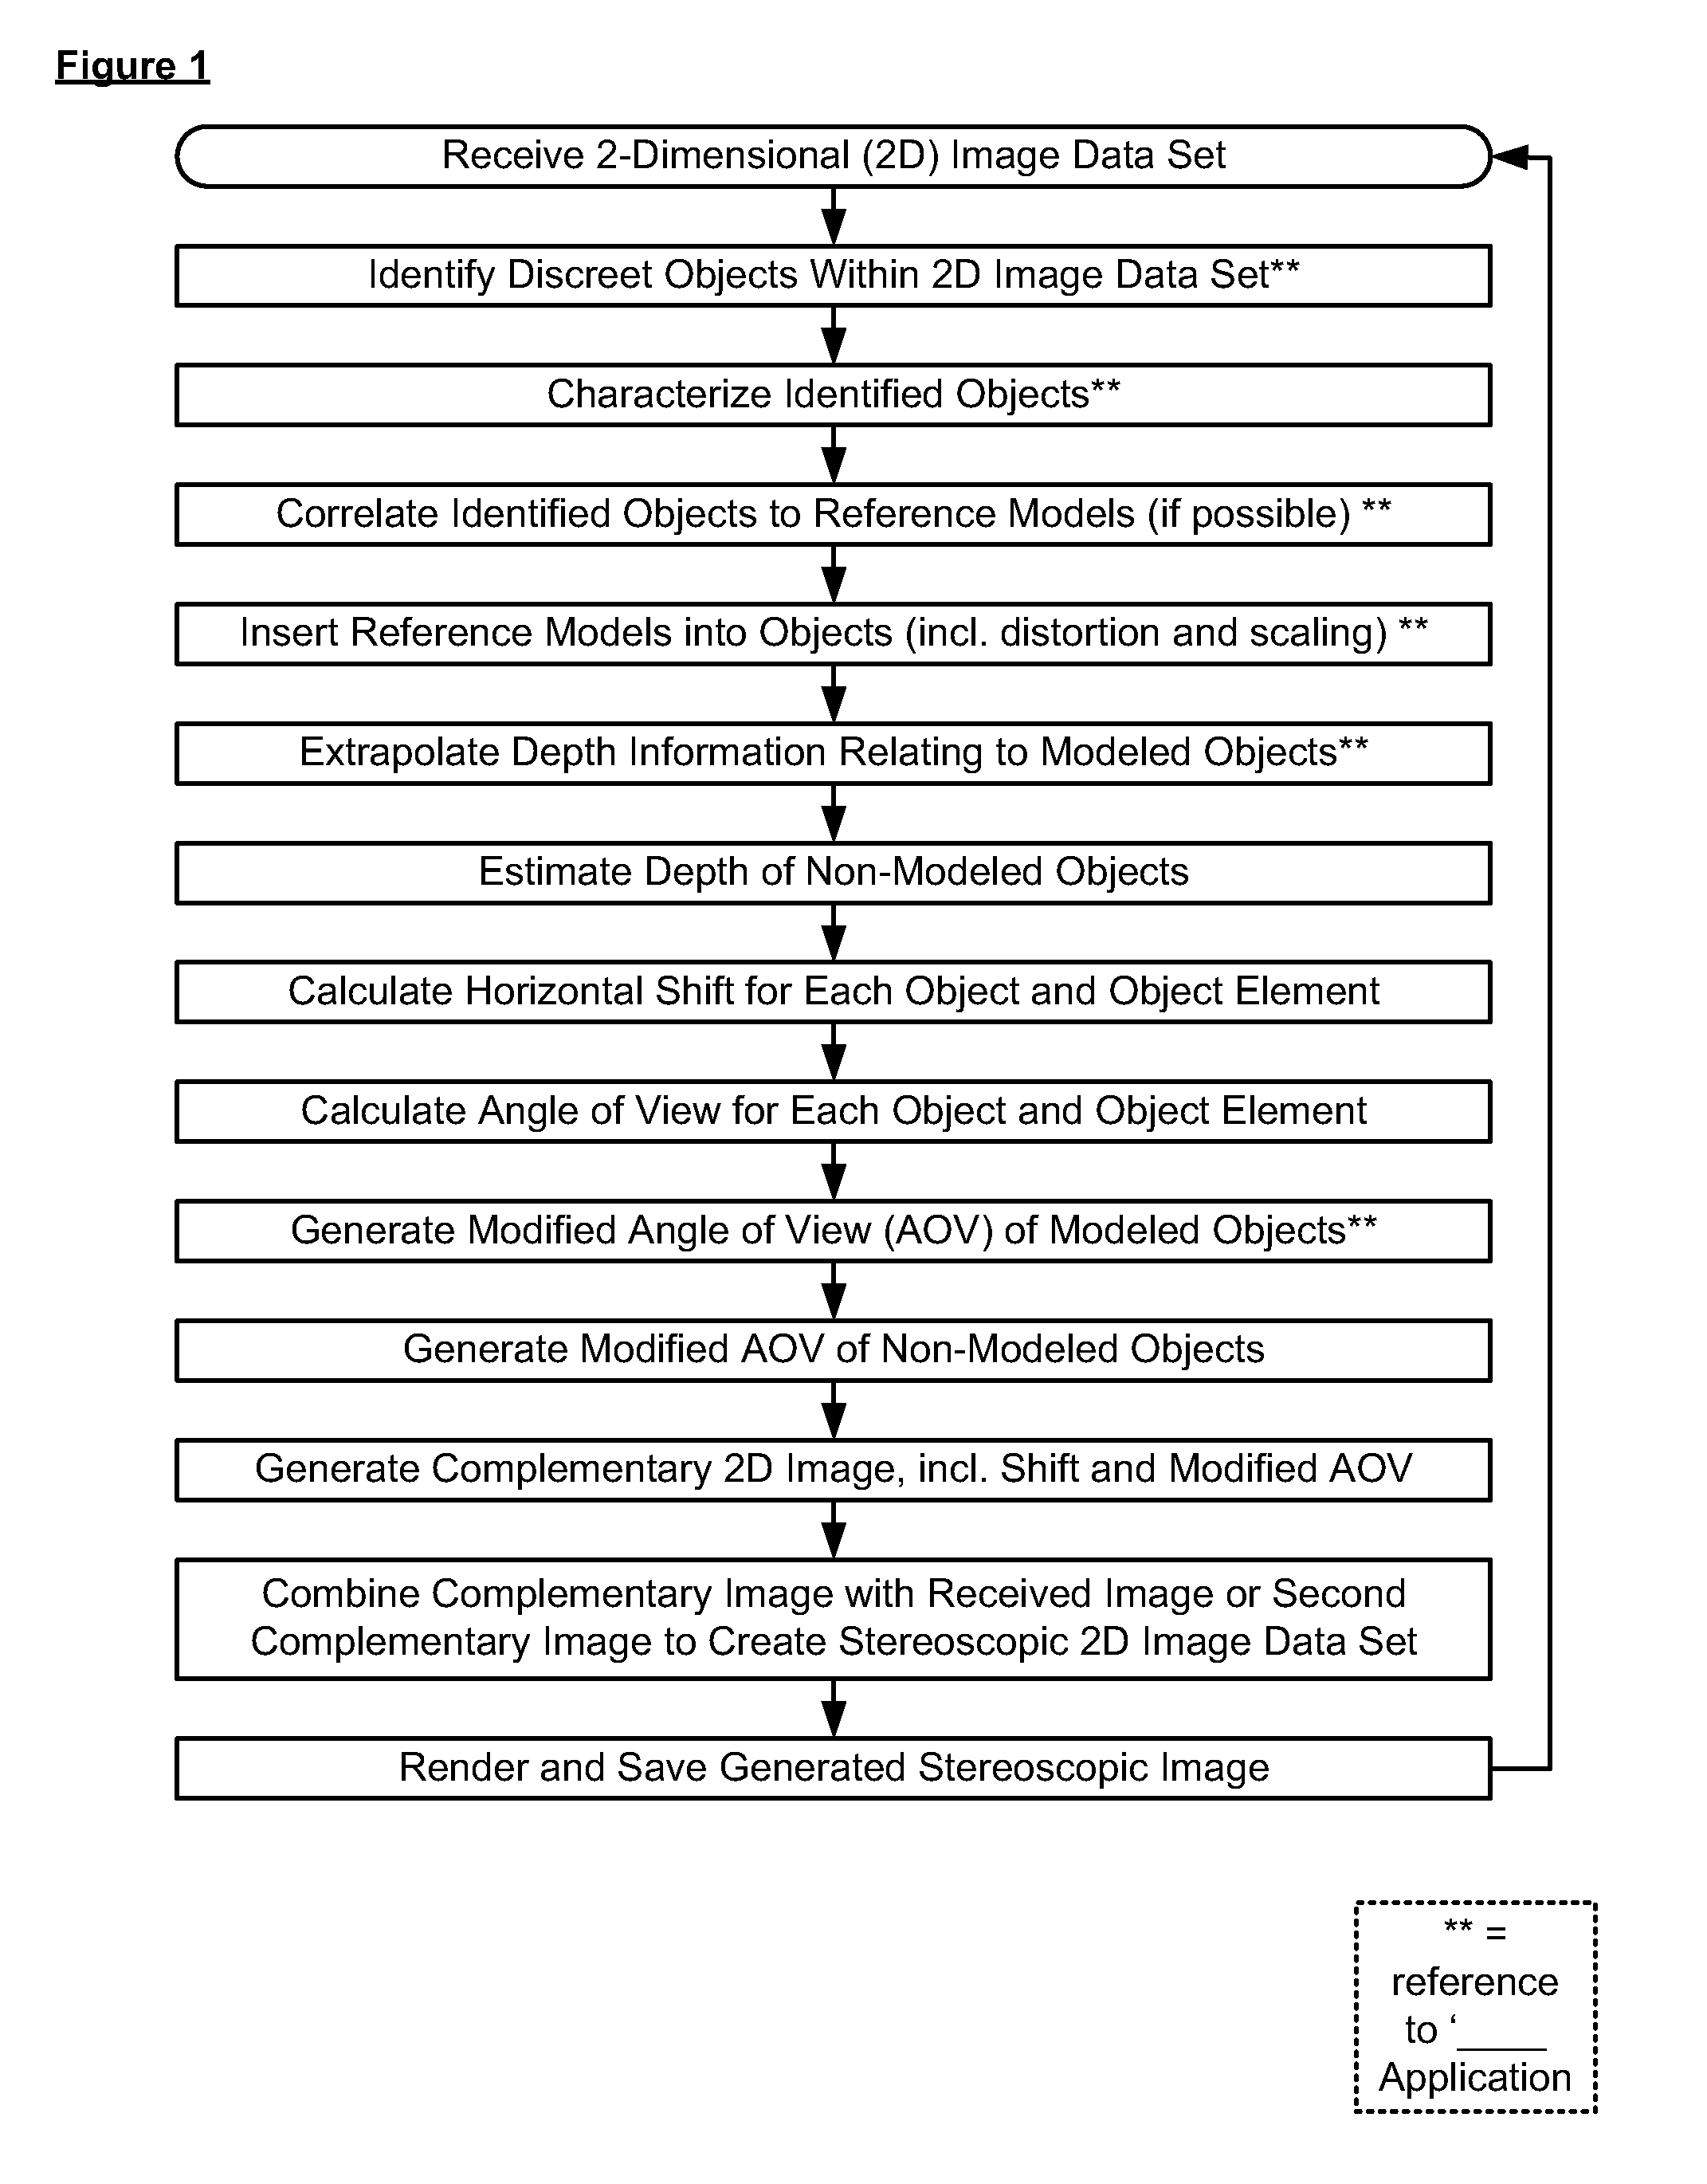 Methods, Systems, Devices and Associated Processing Logic for Generating Stereoscopic Images and Video